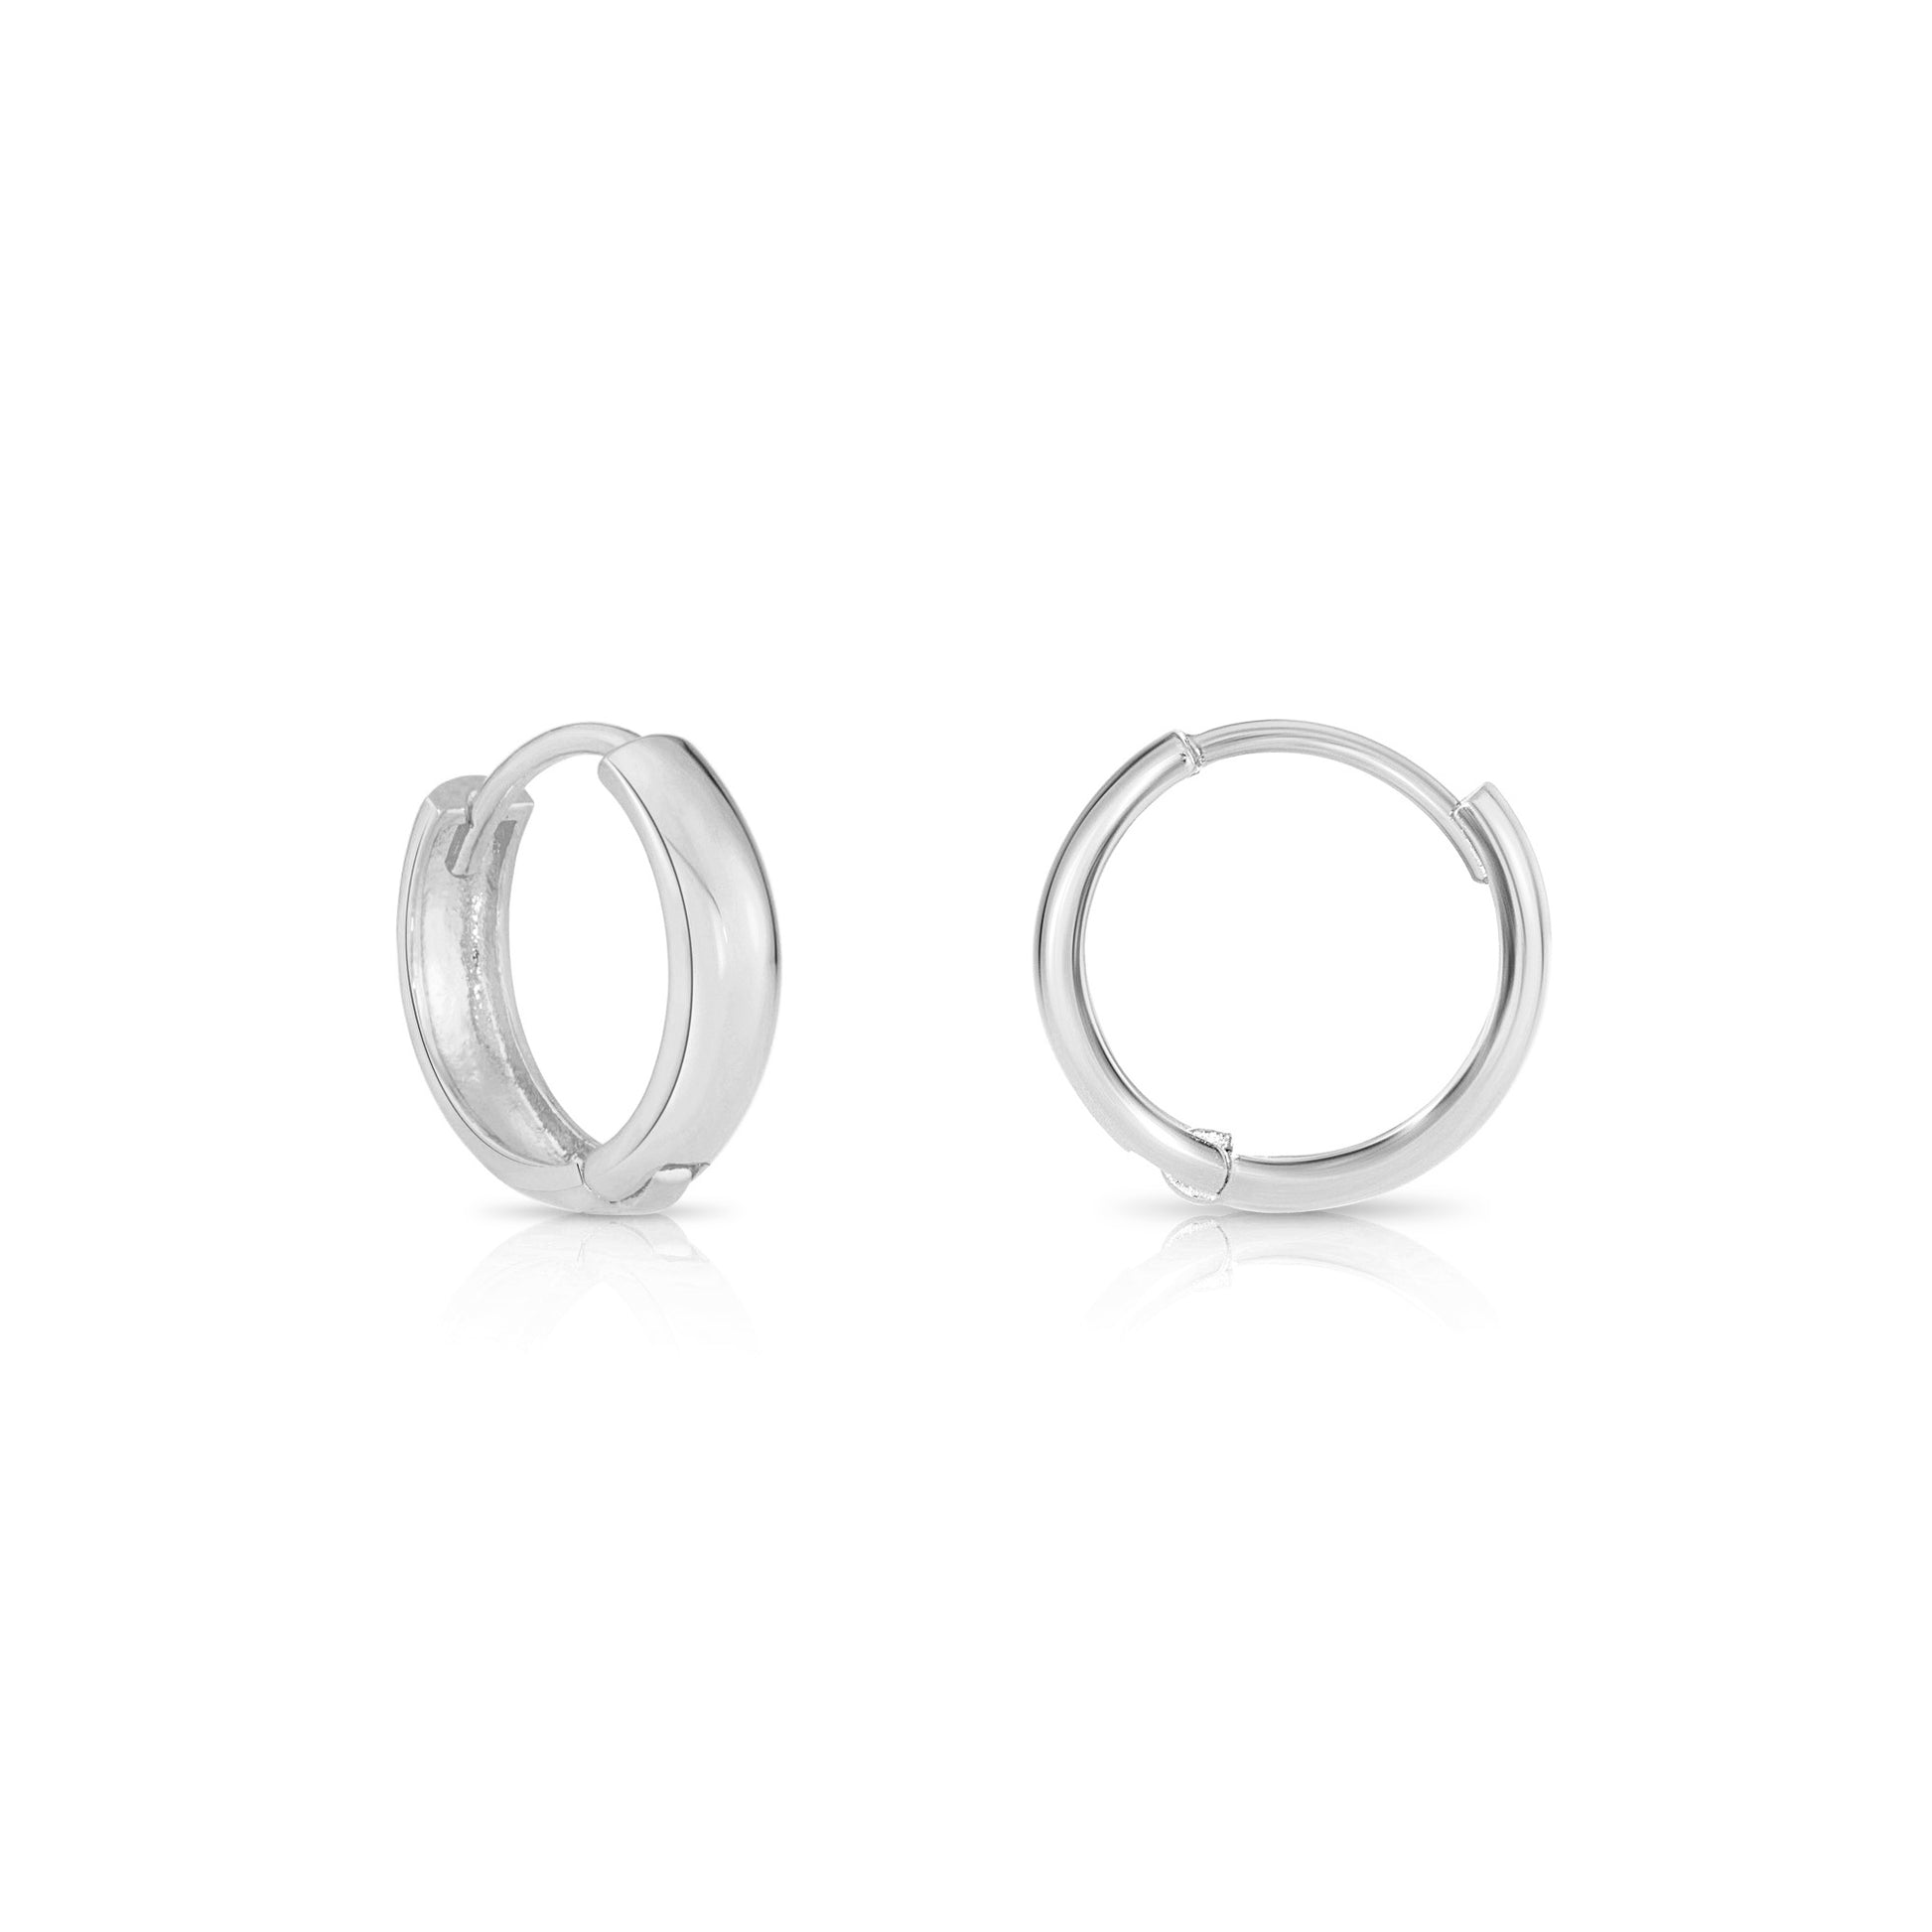 Silver Open Hoop Earrings With 3 Balls, 3/4 Small Thick Huggies